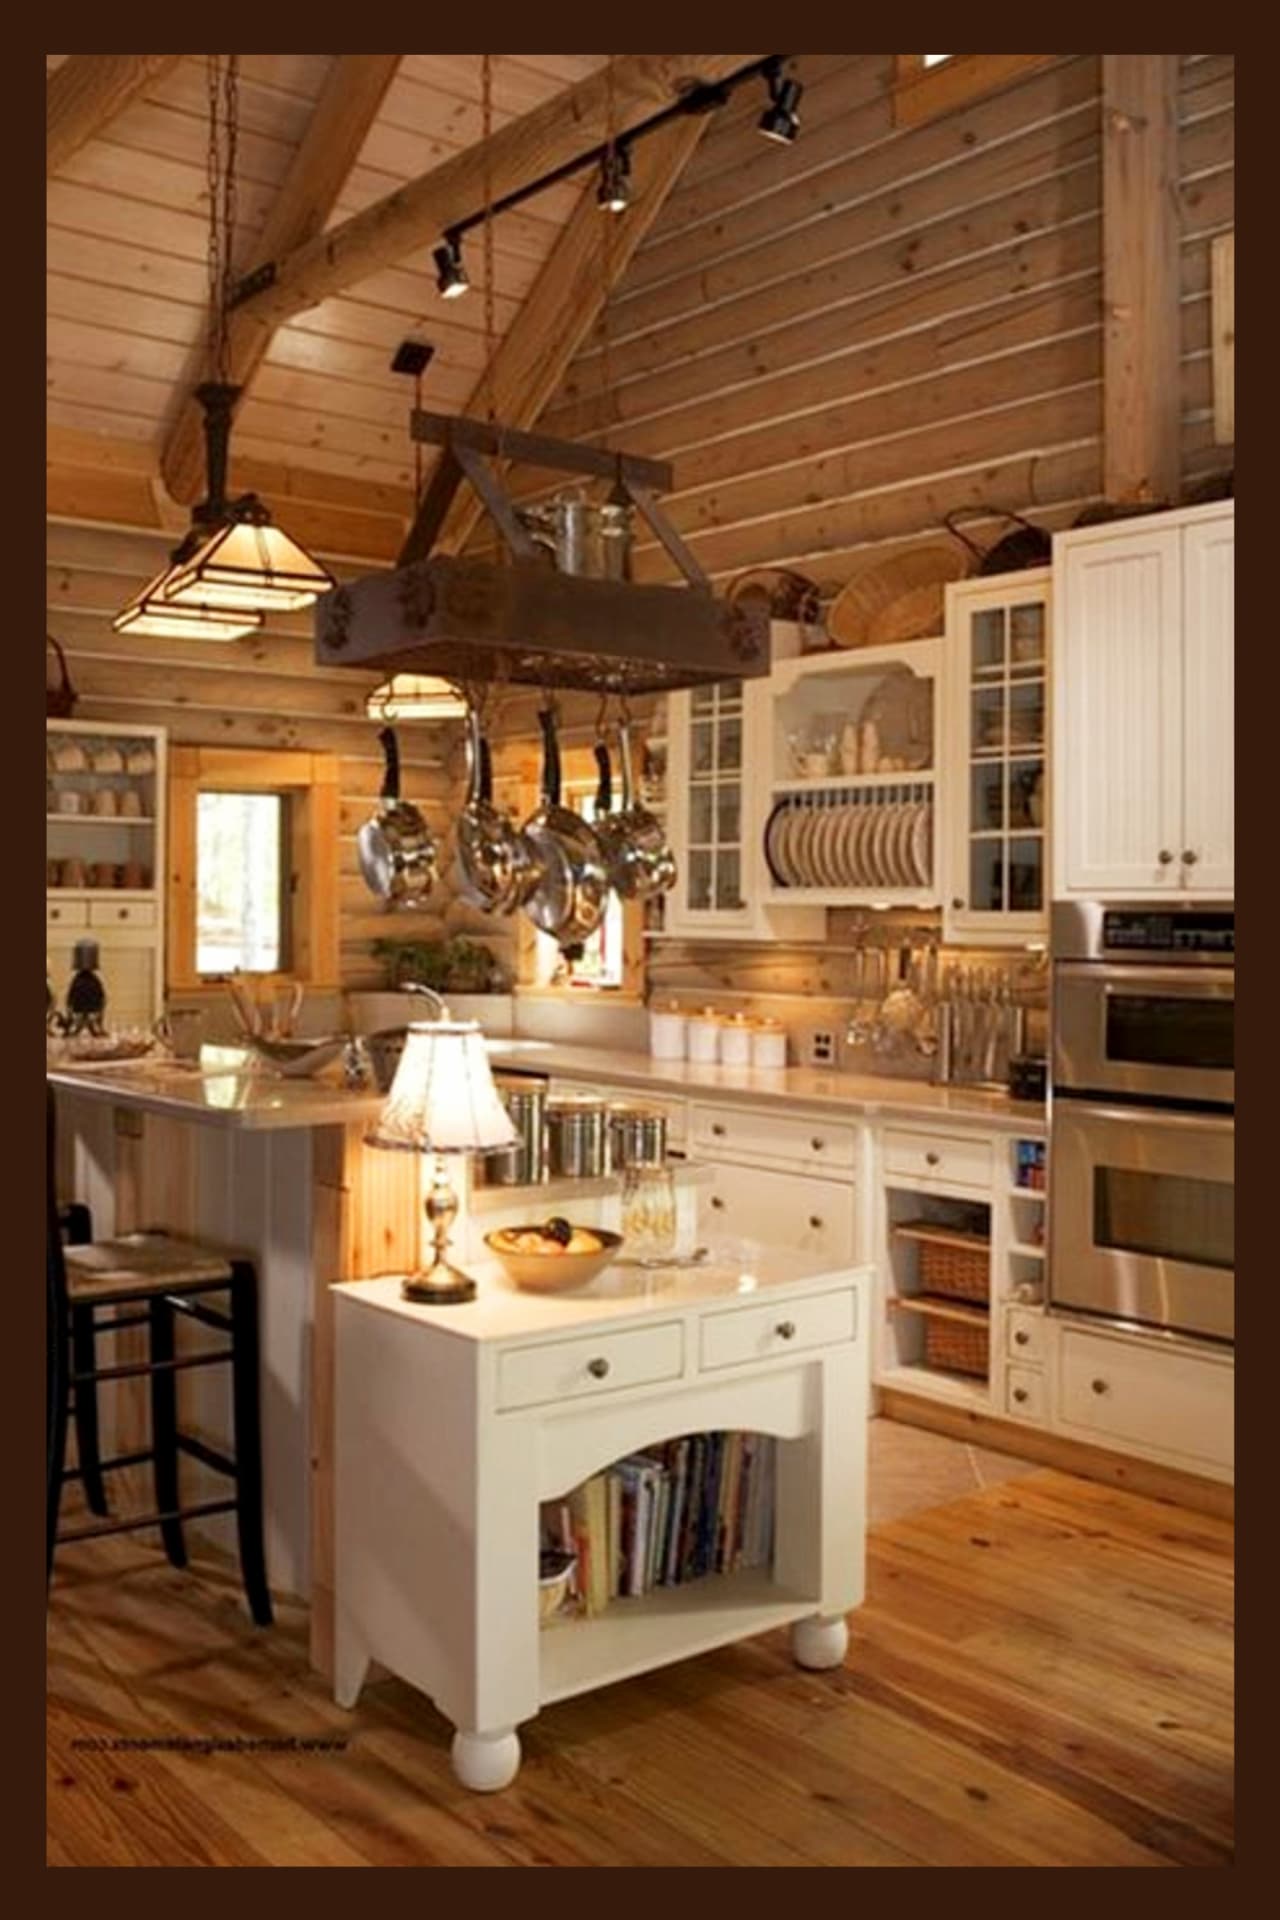 Lake house kitchen ideas for a rustic cottage kitchen on a budget - love the simple open floor plan and small spaces decor of this rustic lake house kitchen